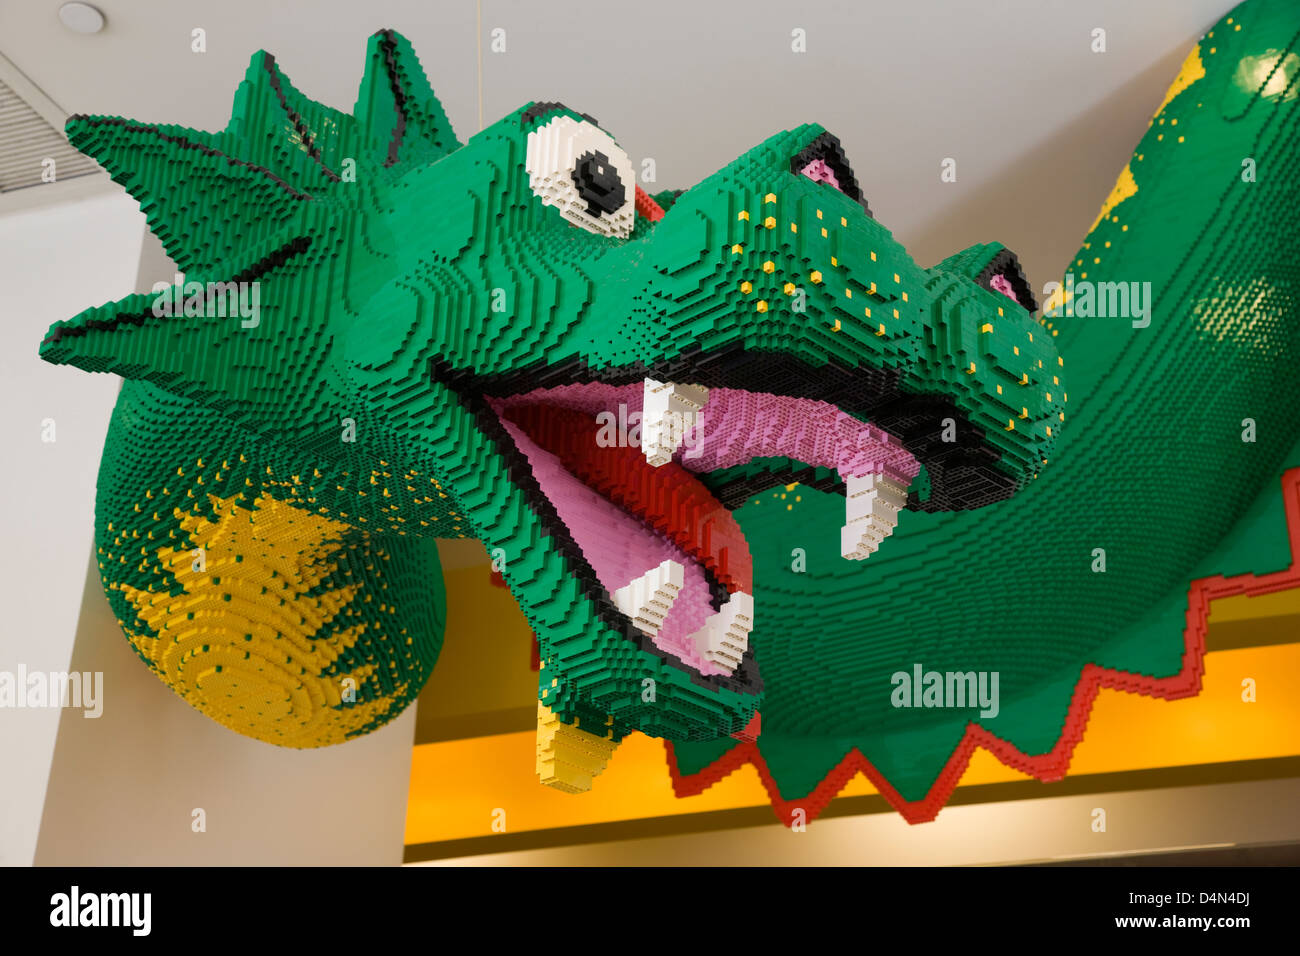 Lego dragon in the Lego shop in New York Stock Photo - Alamy